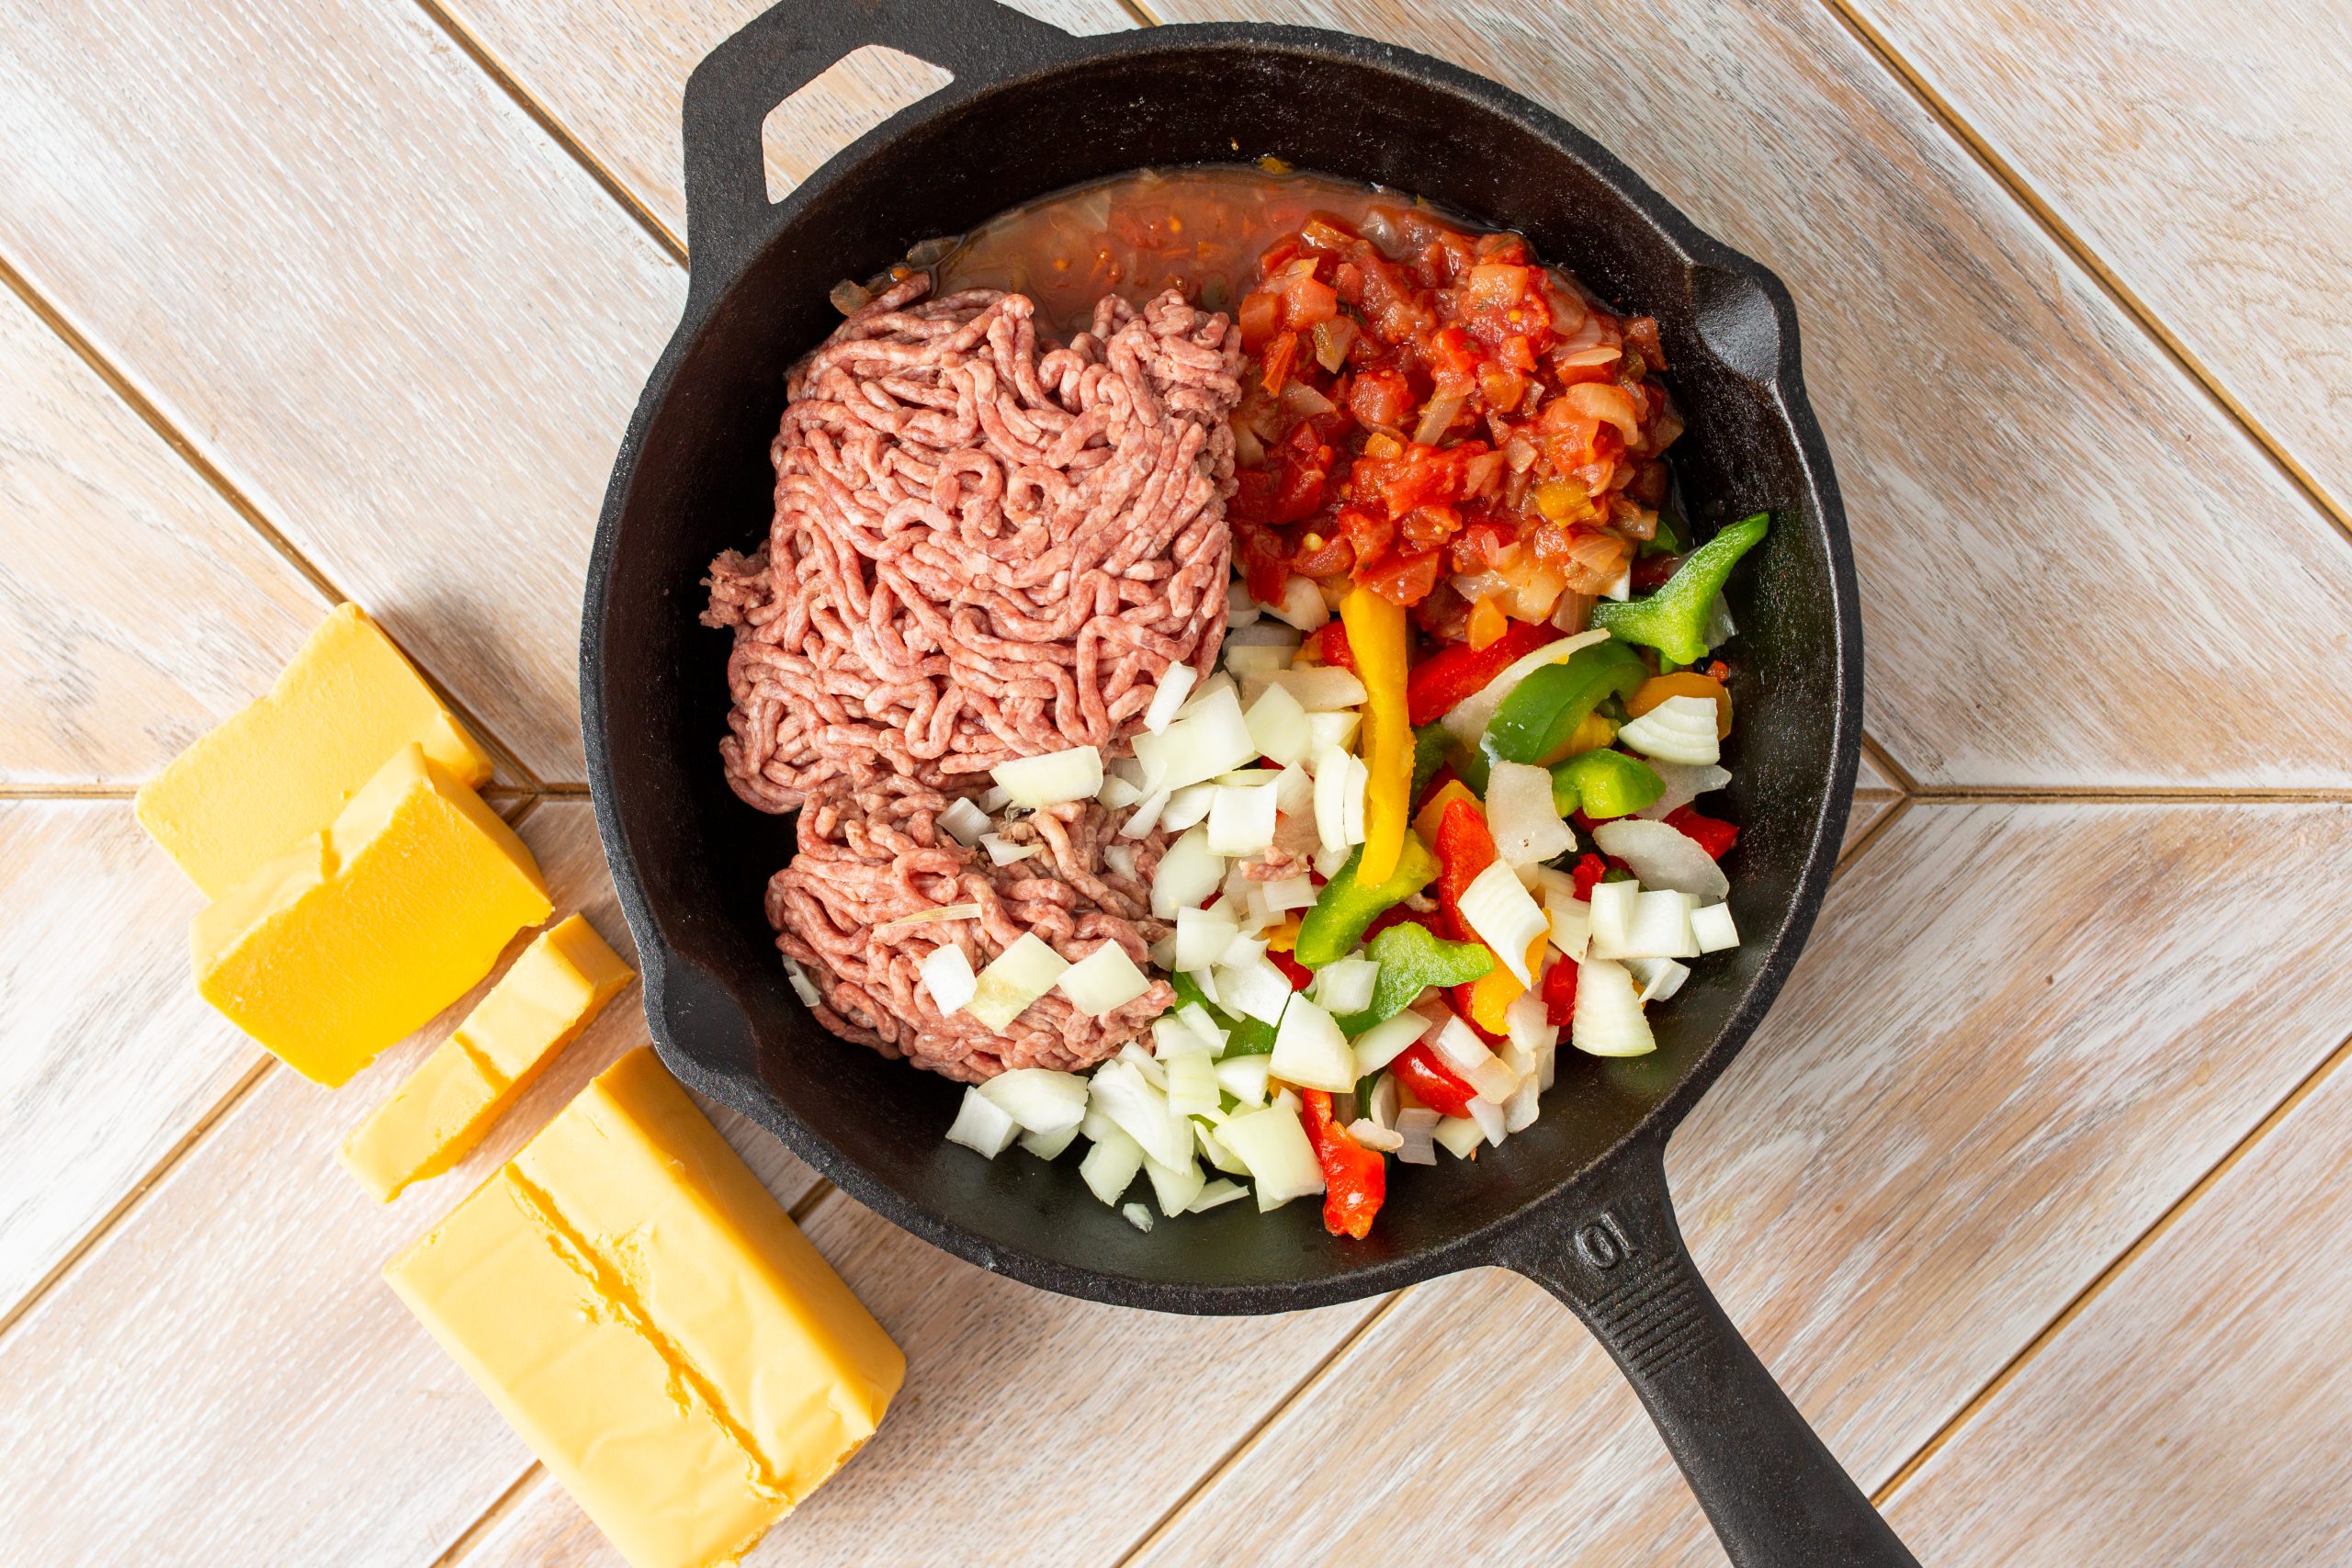 A cast iron skillet holds ground beef, diced onions, sliced bell peppers, and chopped tomatoes. Next to the skillet are three blocks of yellow cheese on a wooden surface.